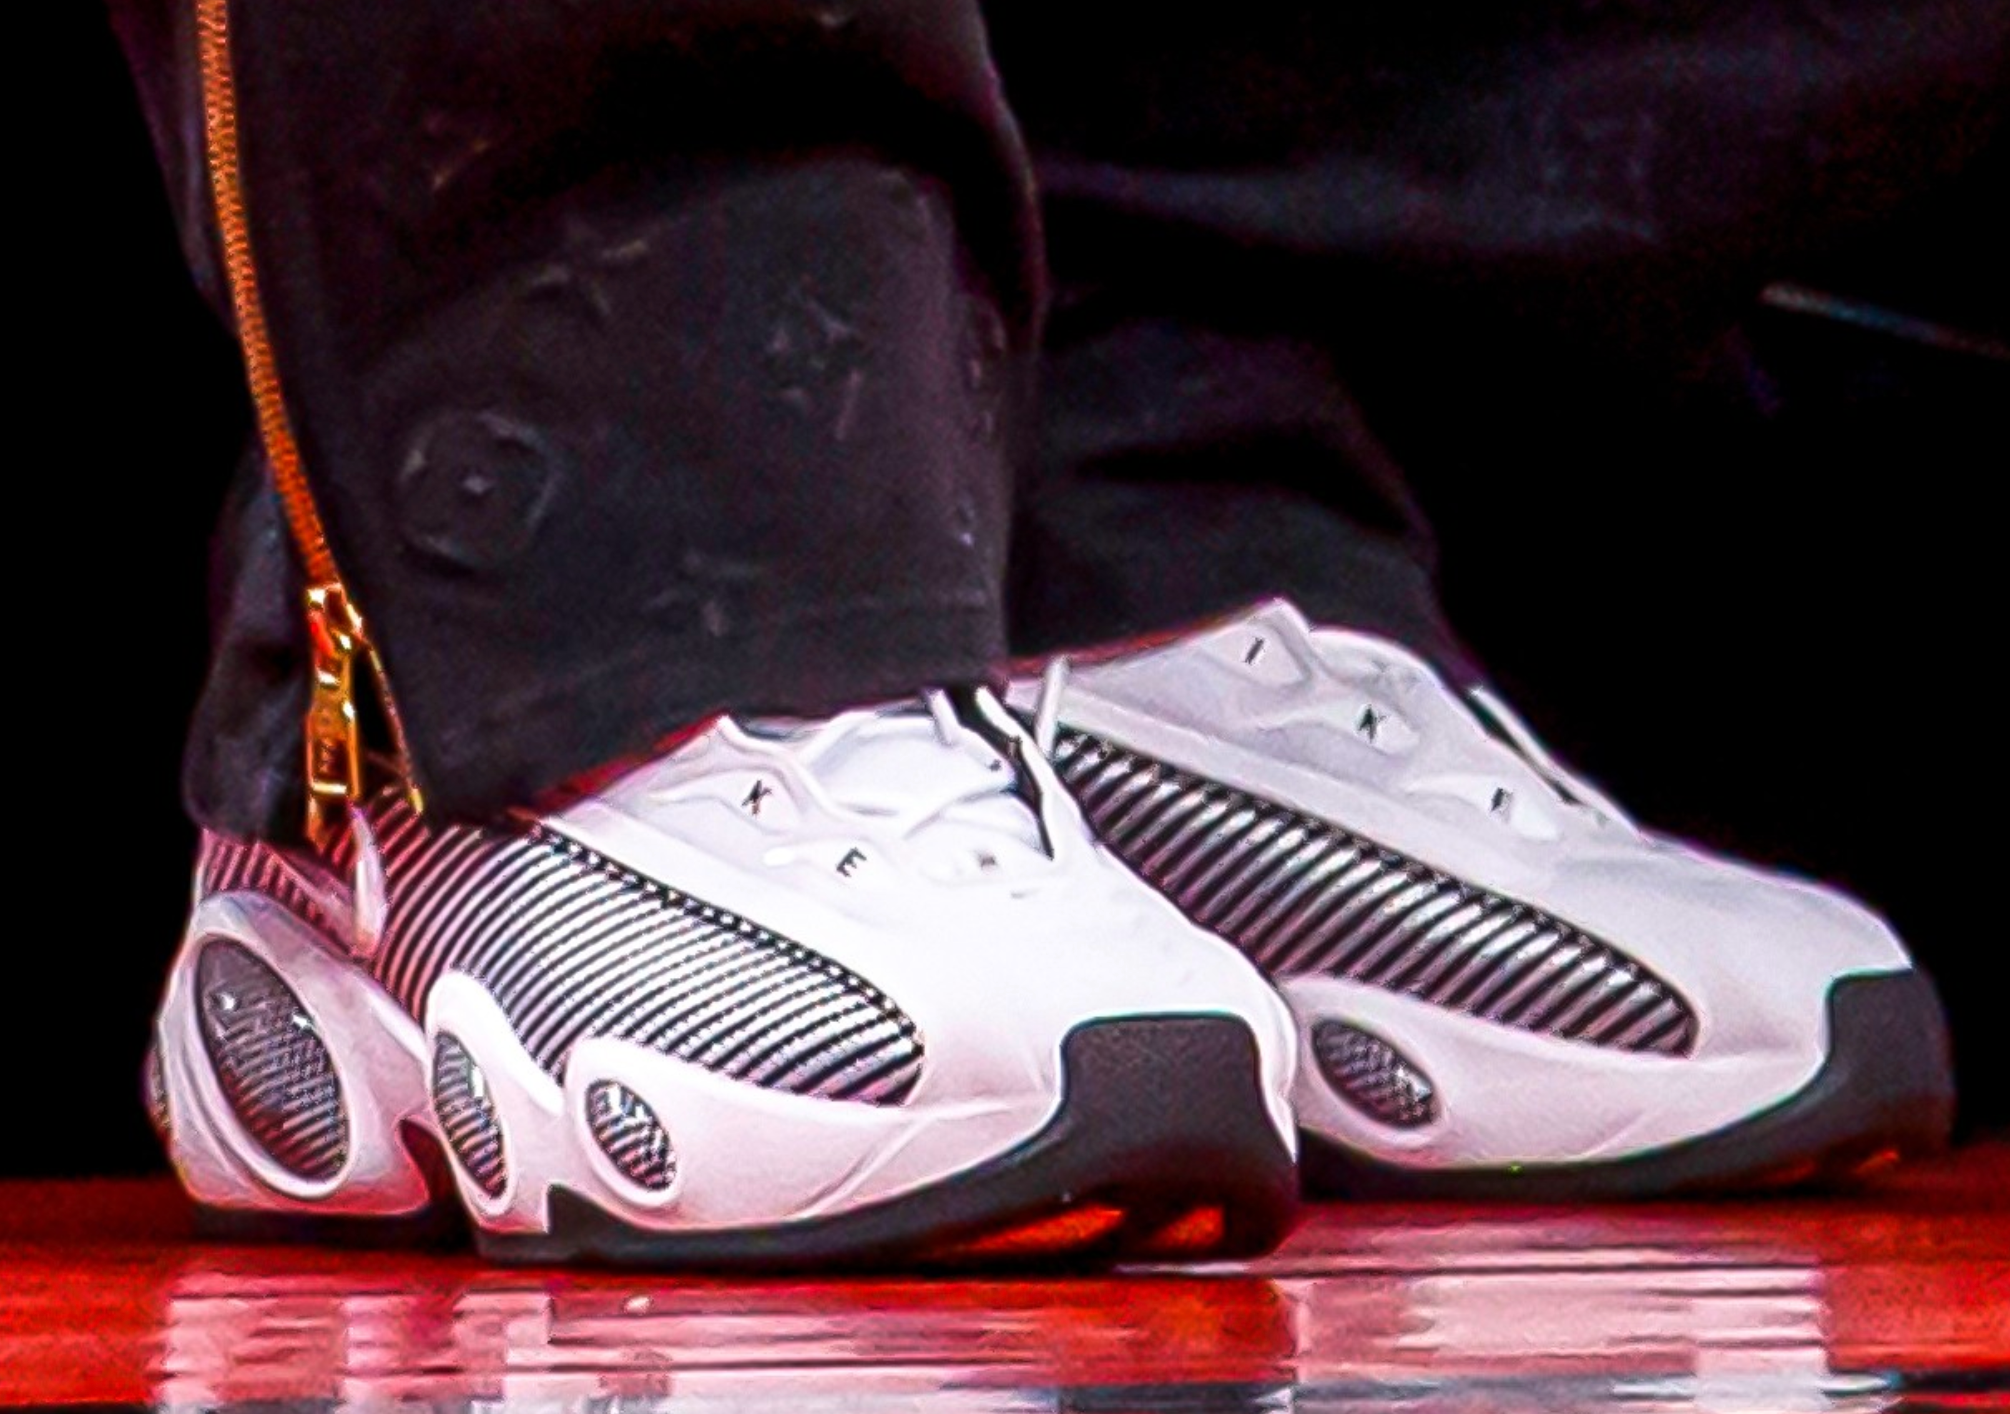 Drake Spotted in Another NOCTA x Nike Zoom Flight 95